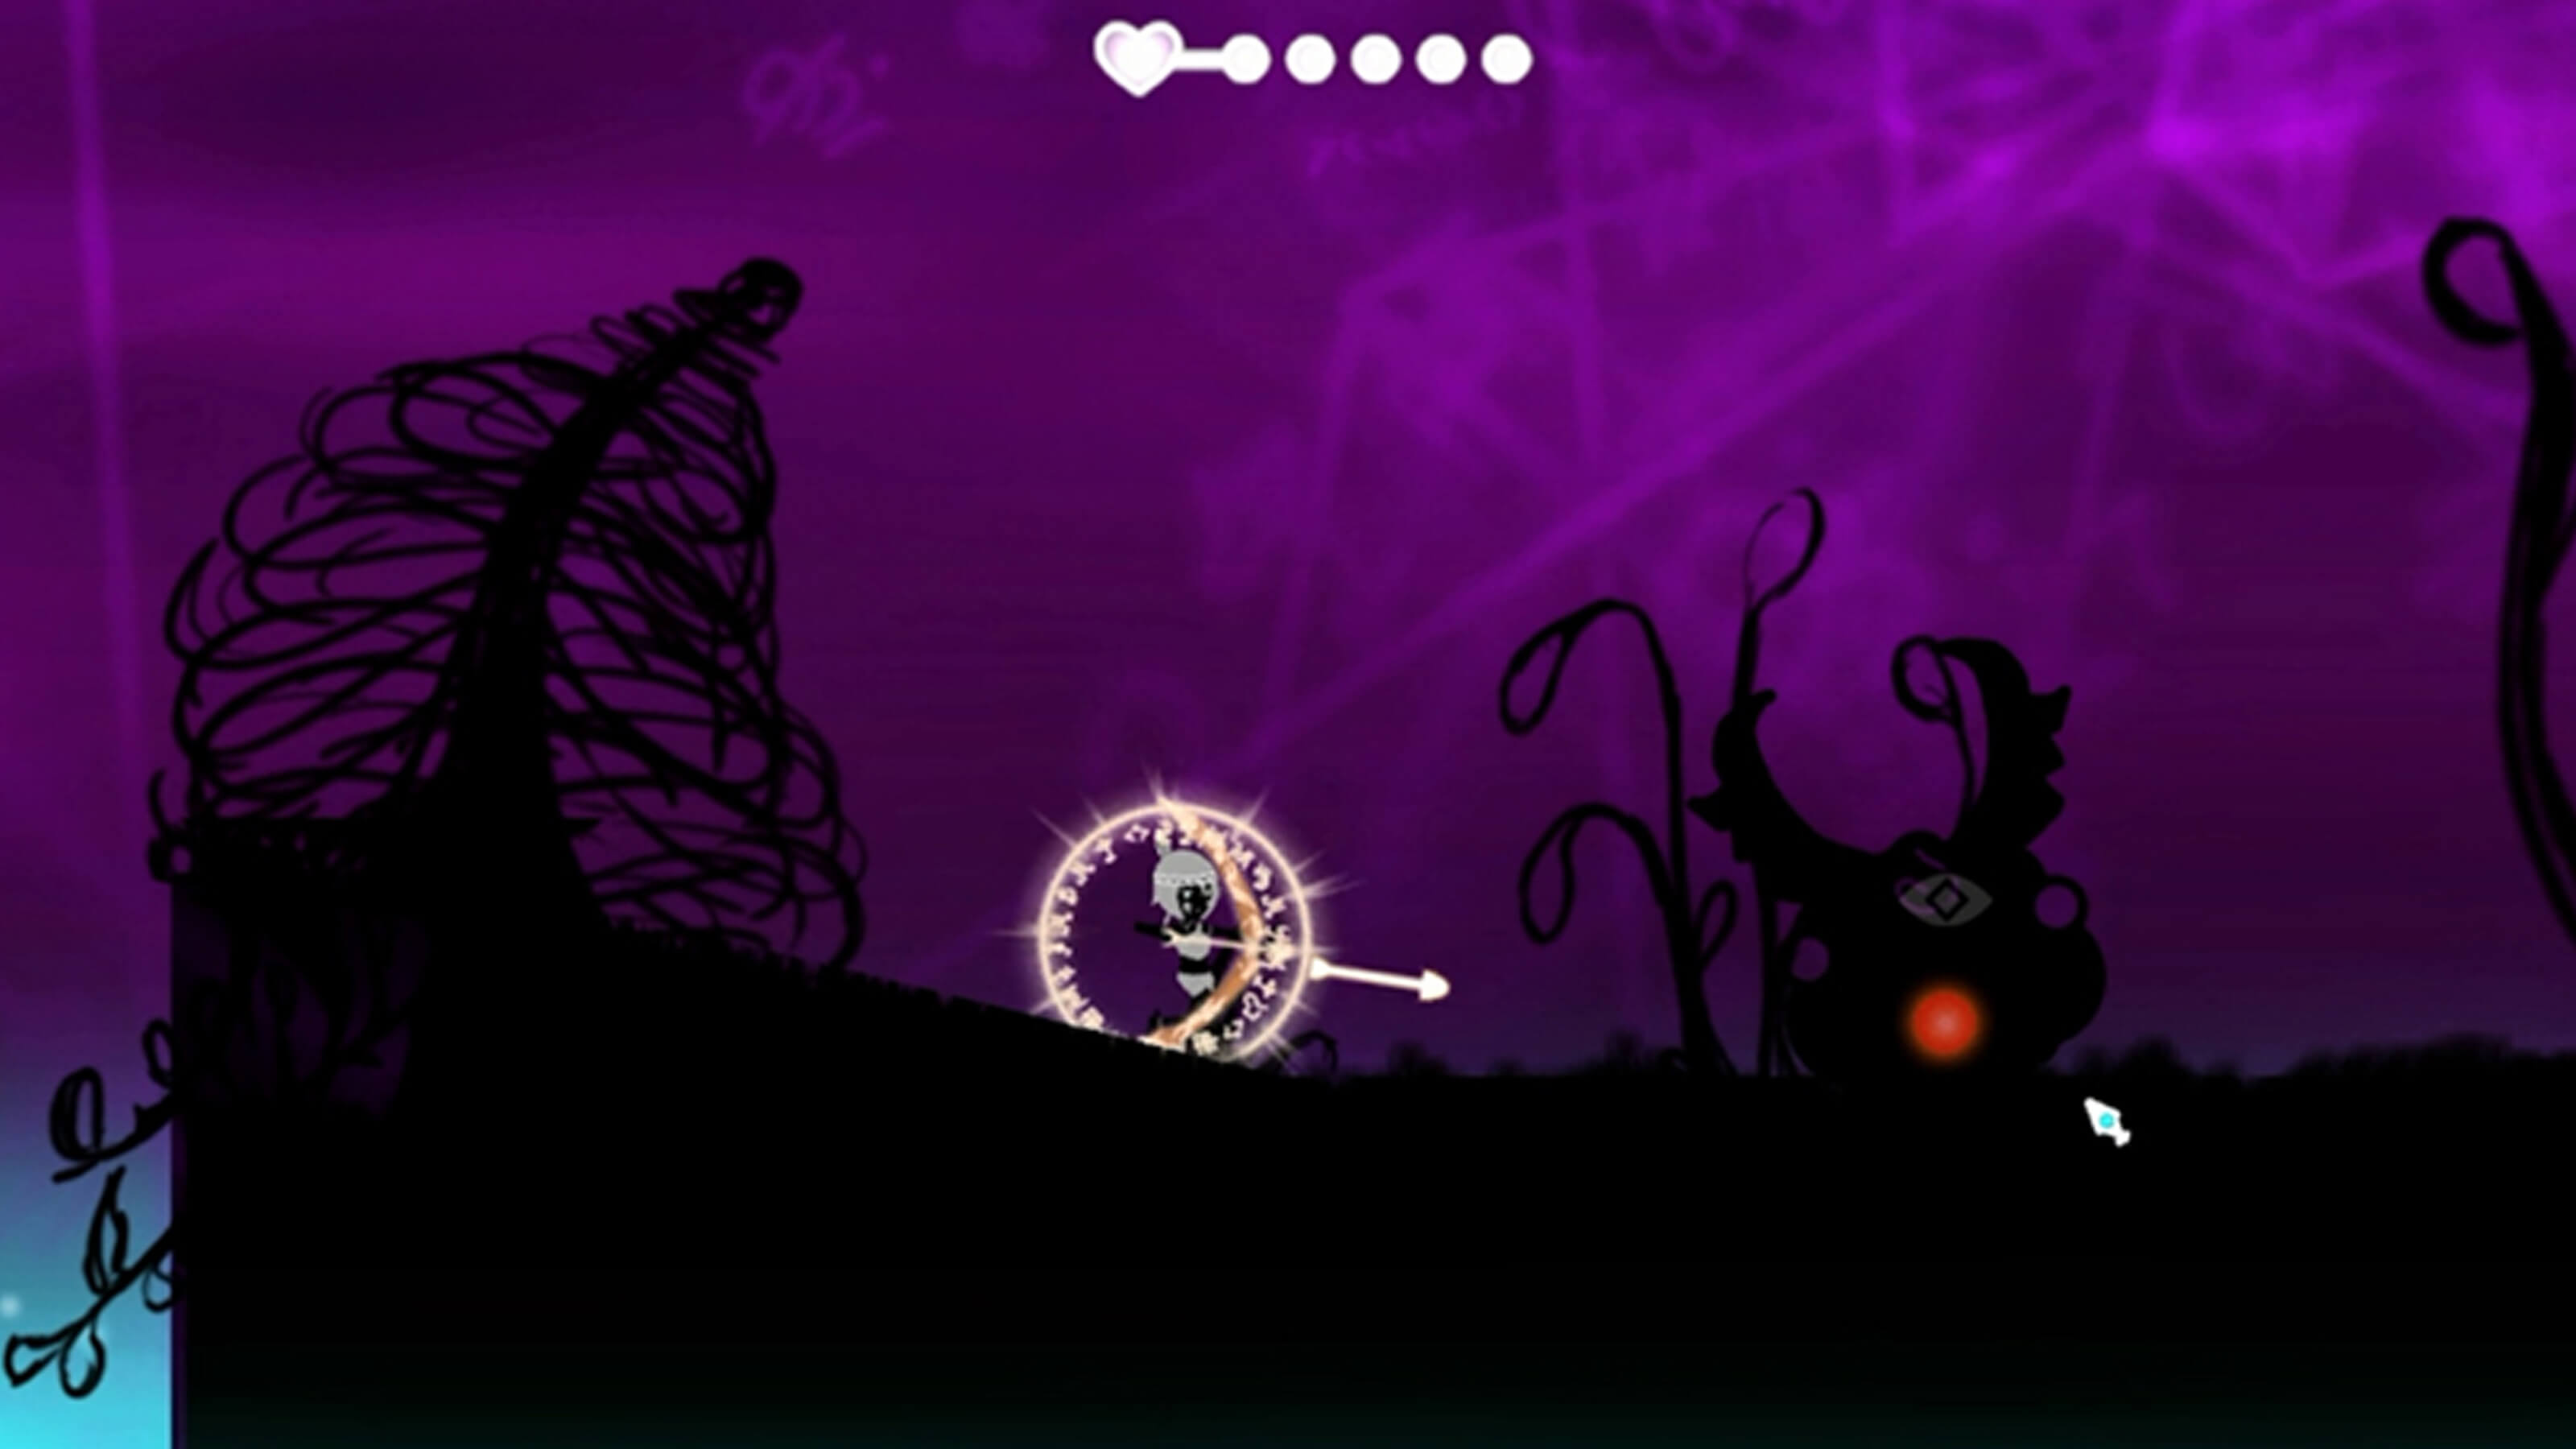 The player's character shoots a shining white arrow at an enemy. She is surrounded by a circle of glowing, white runes.